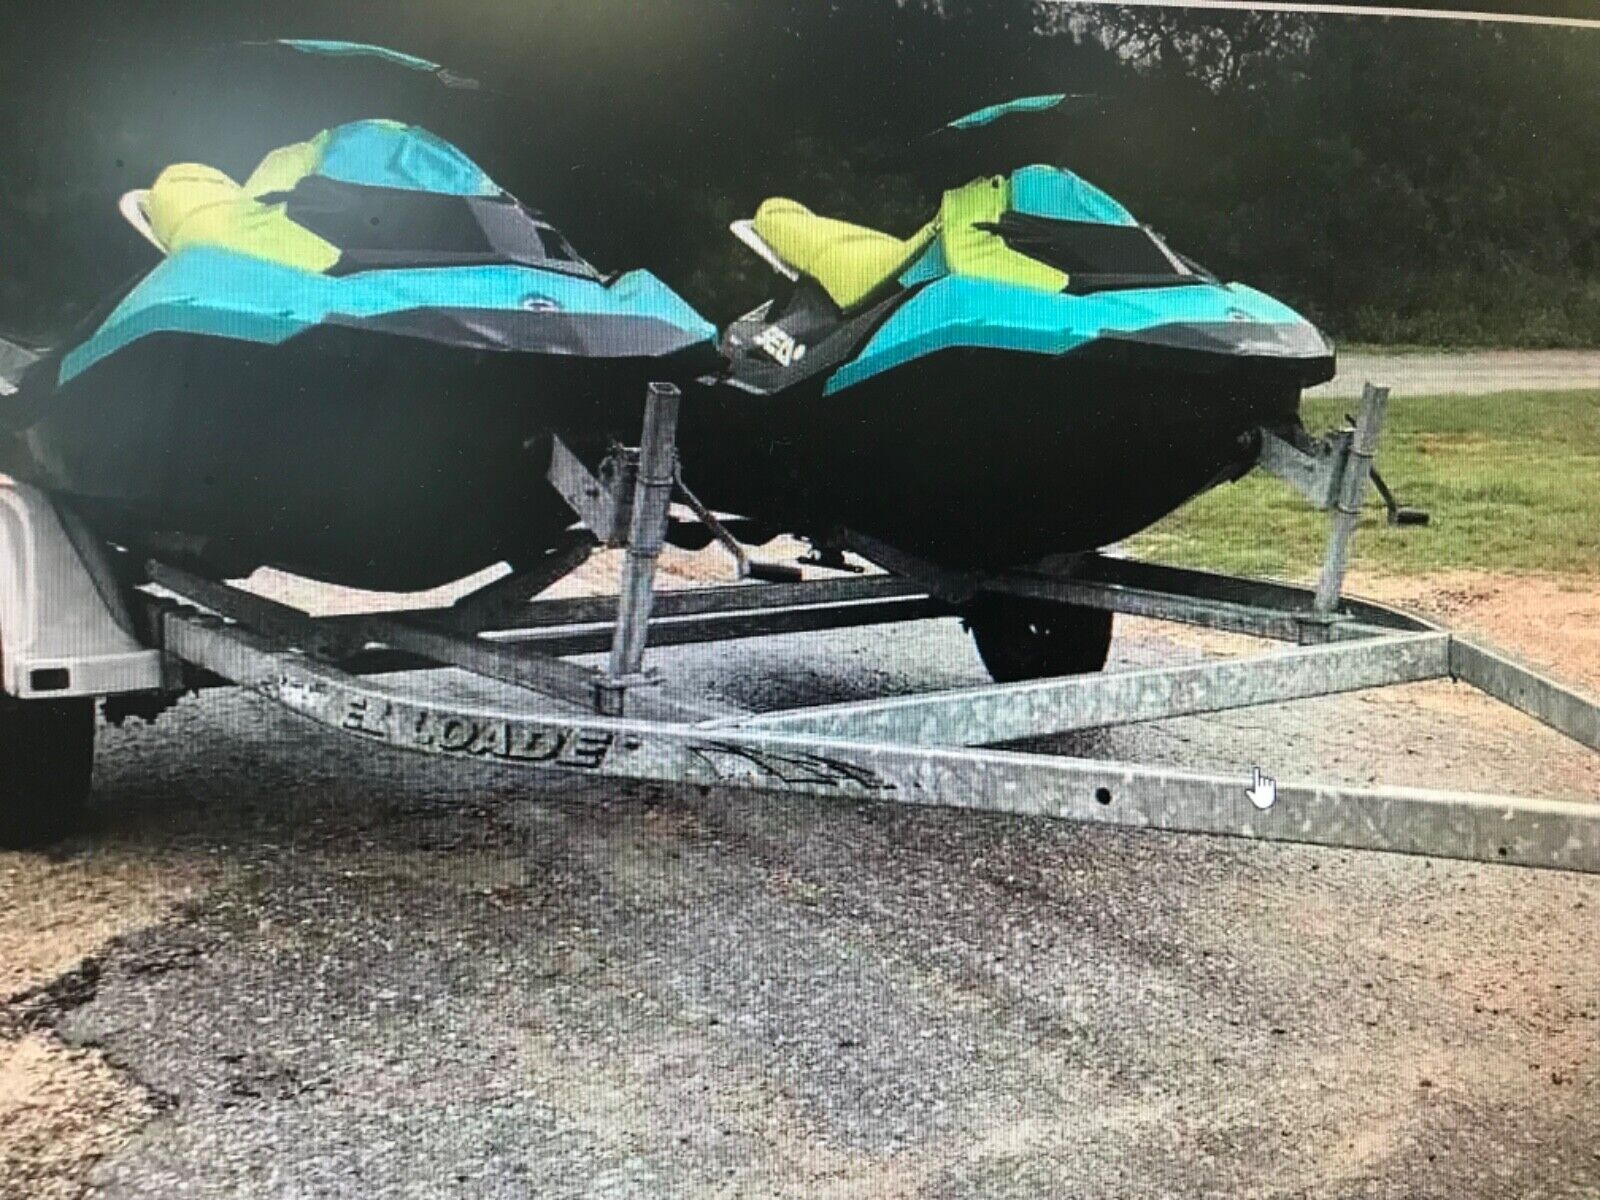 2 - 2022 Sea Doo Spark Jet Skis & Trailer - Texas parts only